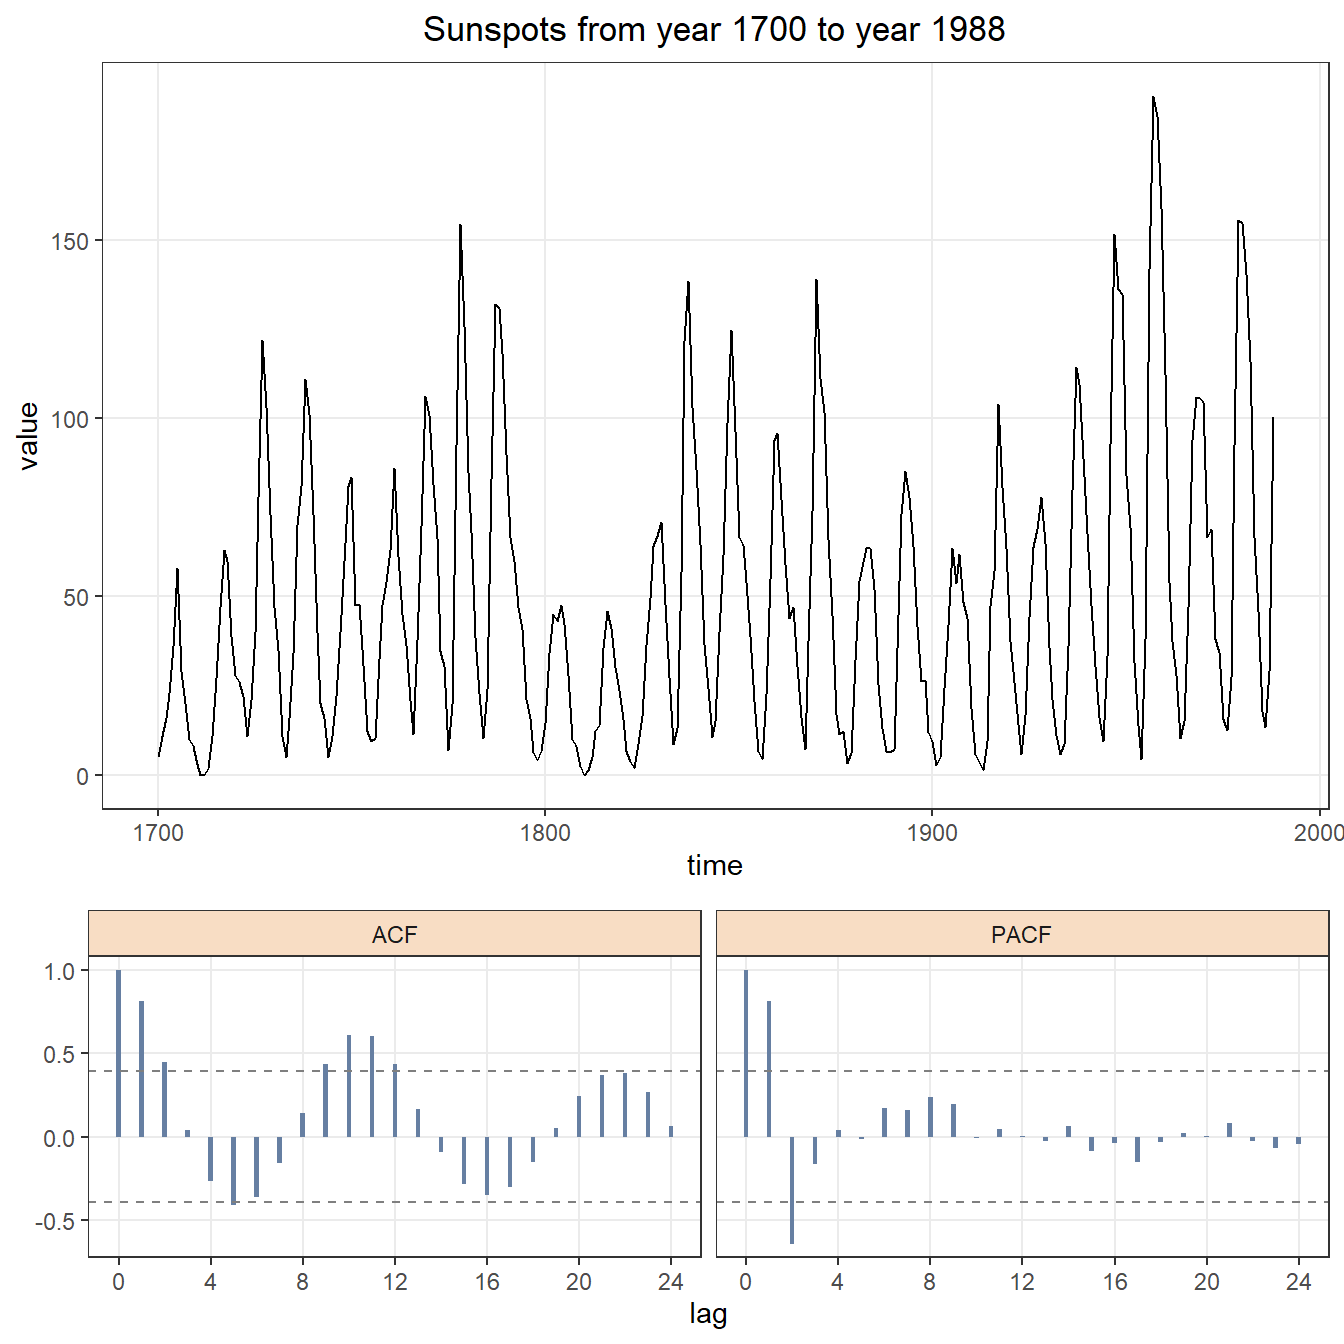 Time series plot with ACF and PACF